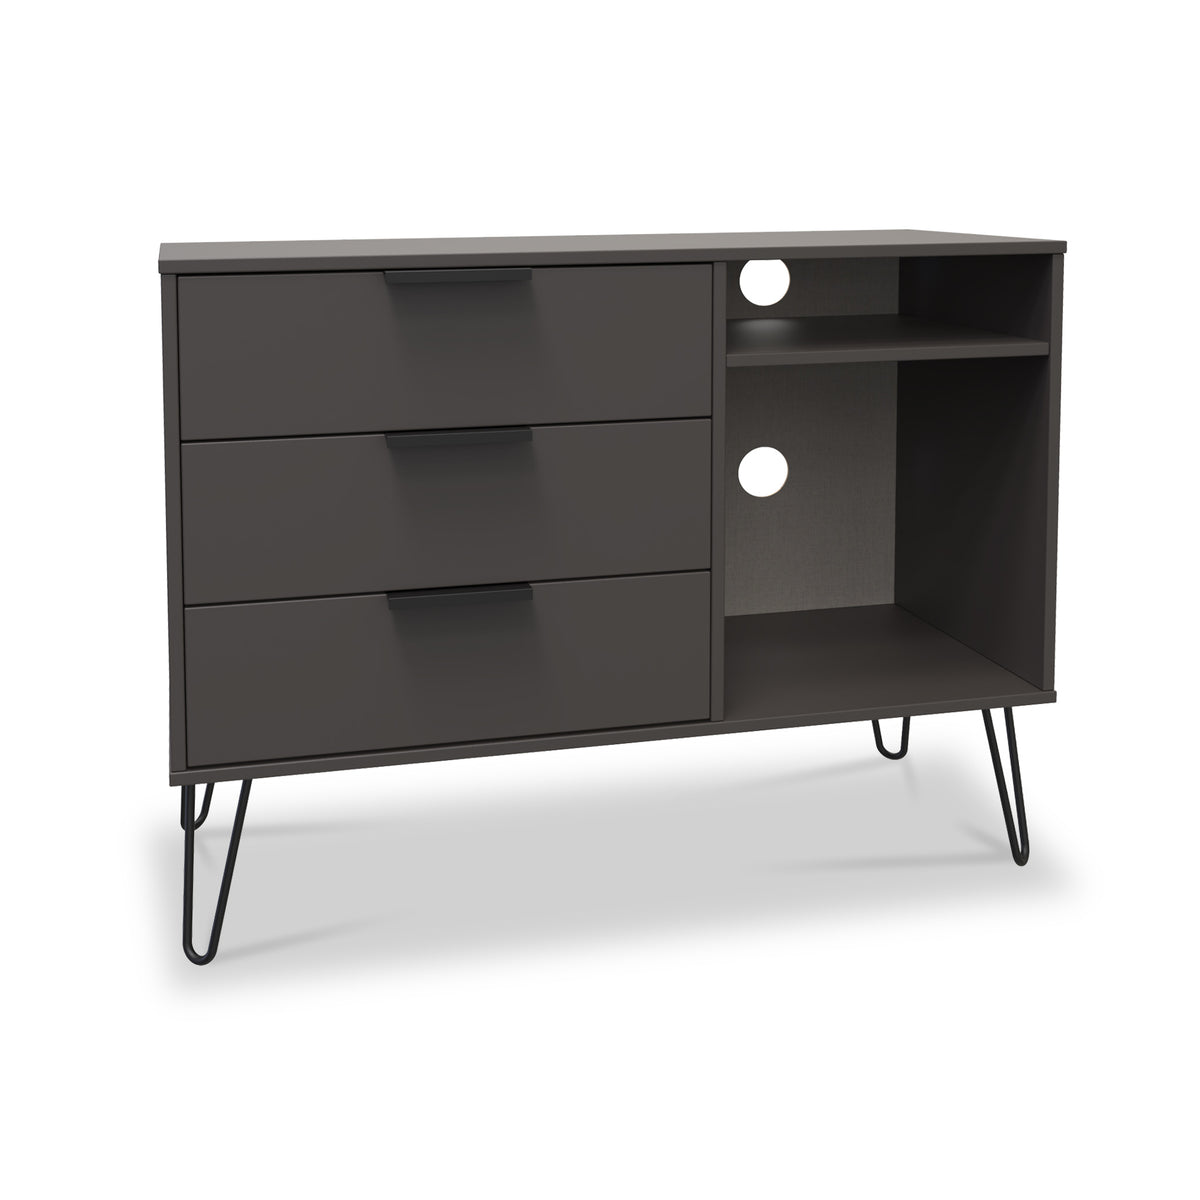 Moreno Graphite 3 Drawer TV Unit with Gold Hairpin Legs from Roseland Furniture